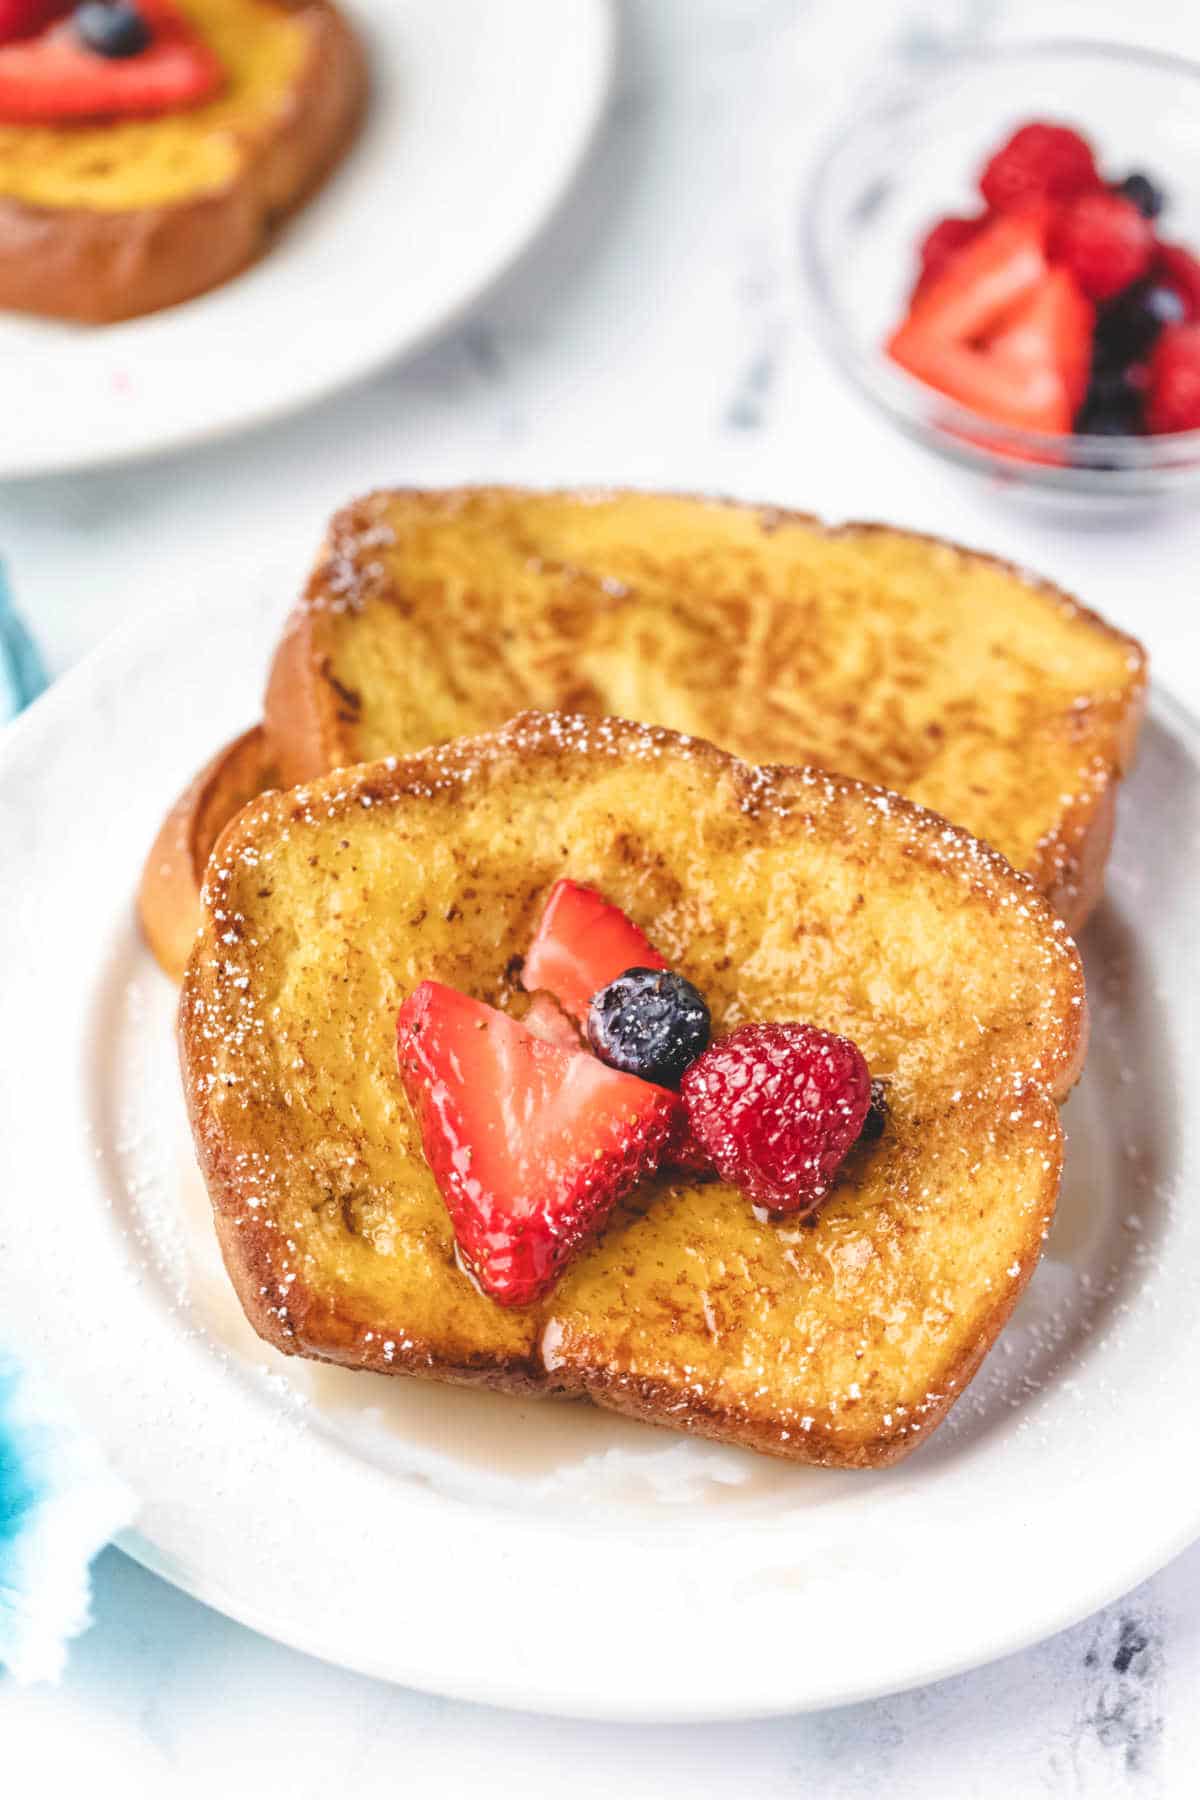 Stack of brioche French toast with berries on it.